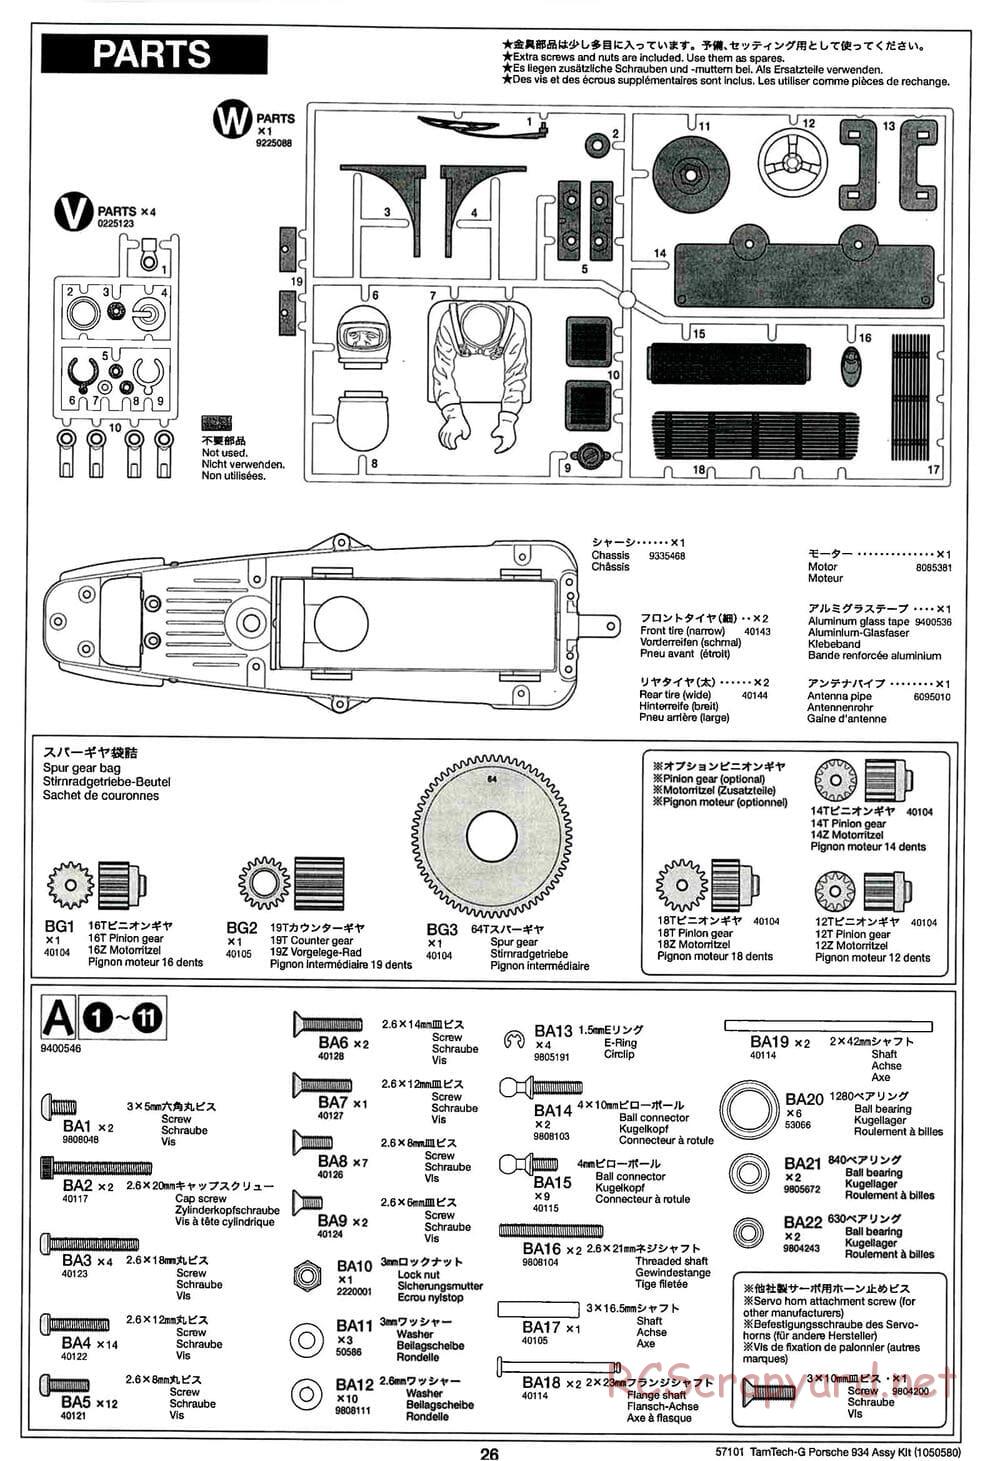 Tamiya - Porsche Turbo RSR - GT-01 Chassis - Manual - Page 26